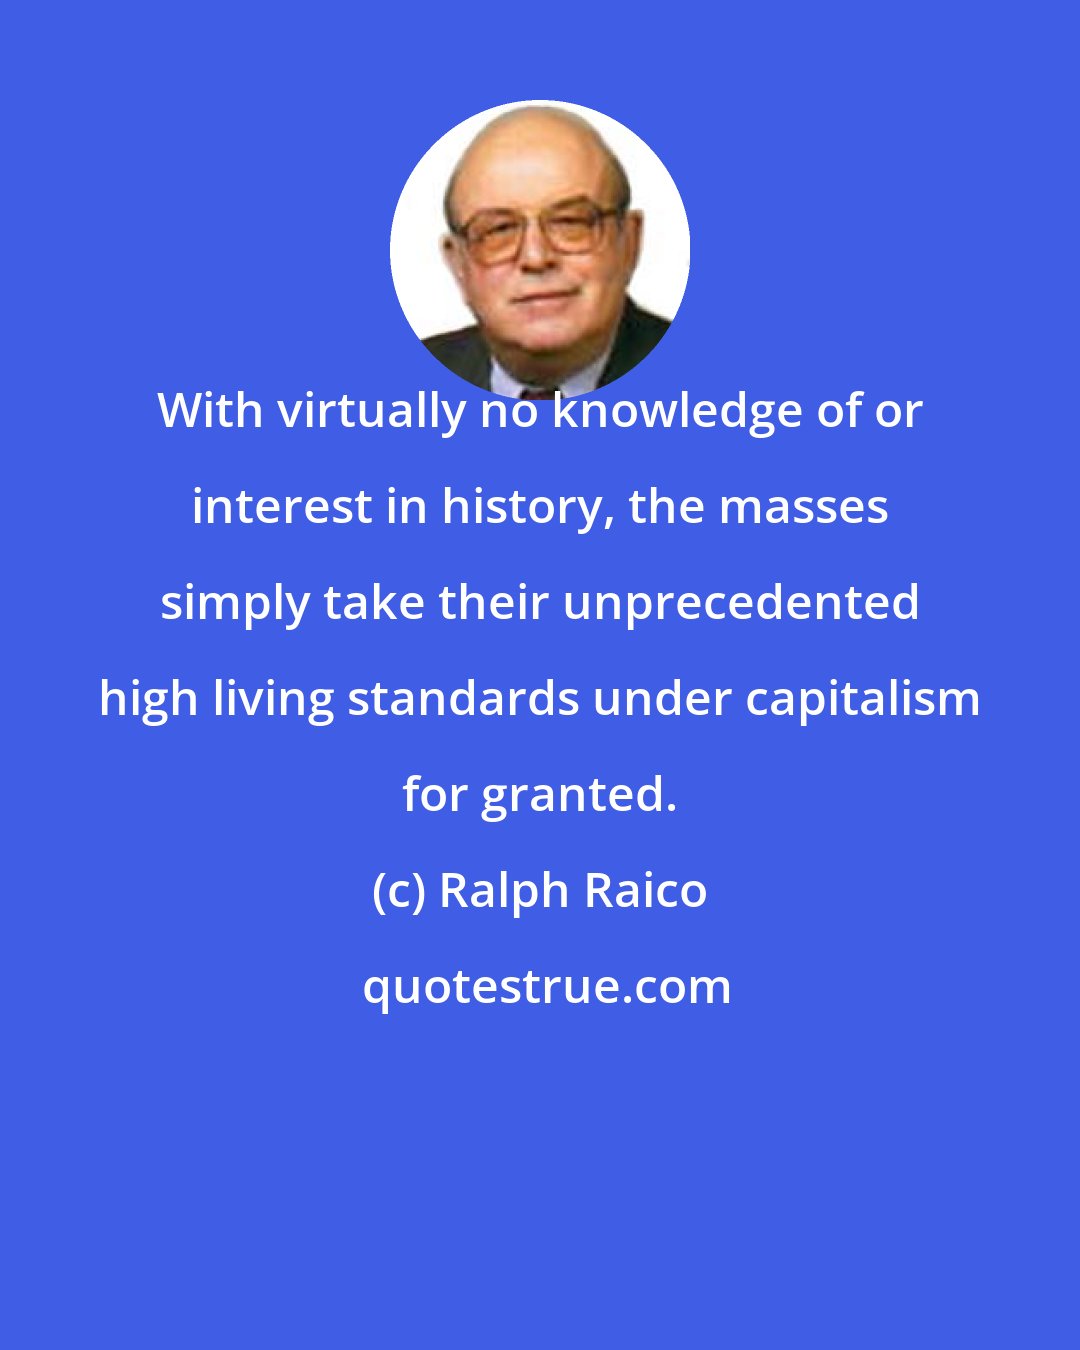 Ralph Raico: With virtually no knowledge of or interest in history, the masses simply take their unprecedented high living standards under capitalism for granted.